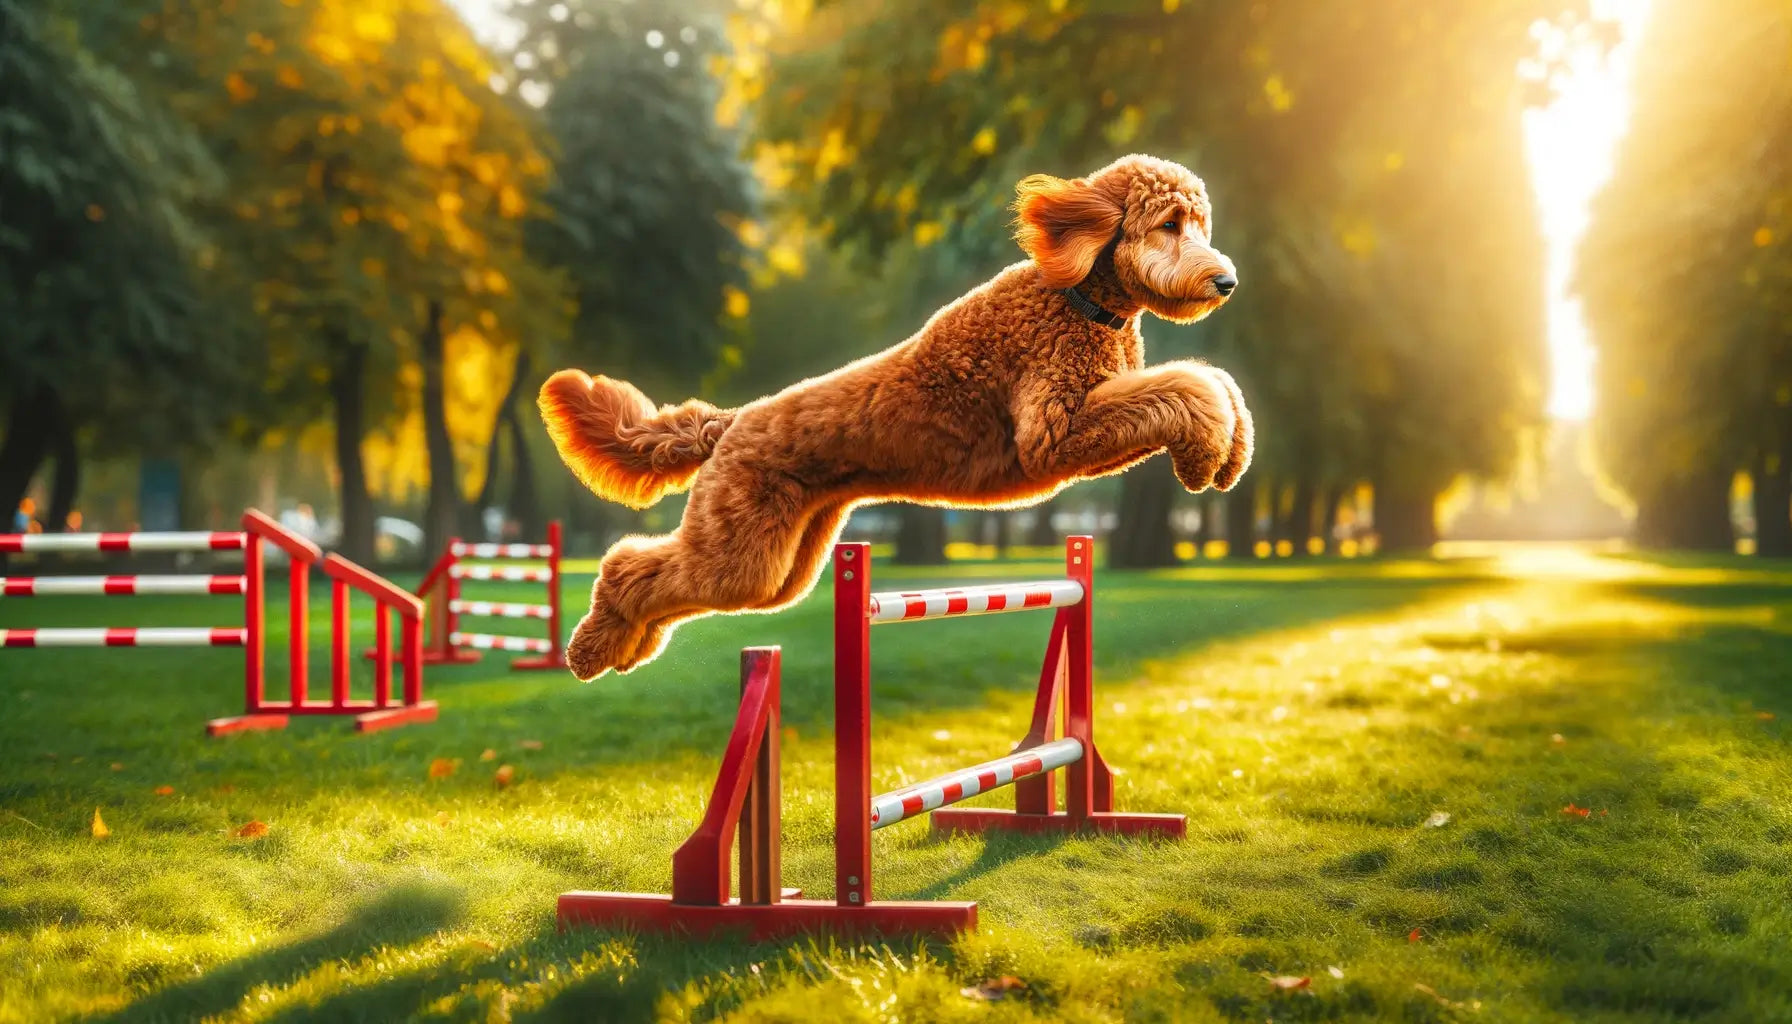 Red Goldendoodle leaping over a hurdle in a park, showing agility and strength.